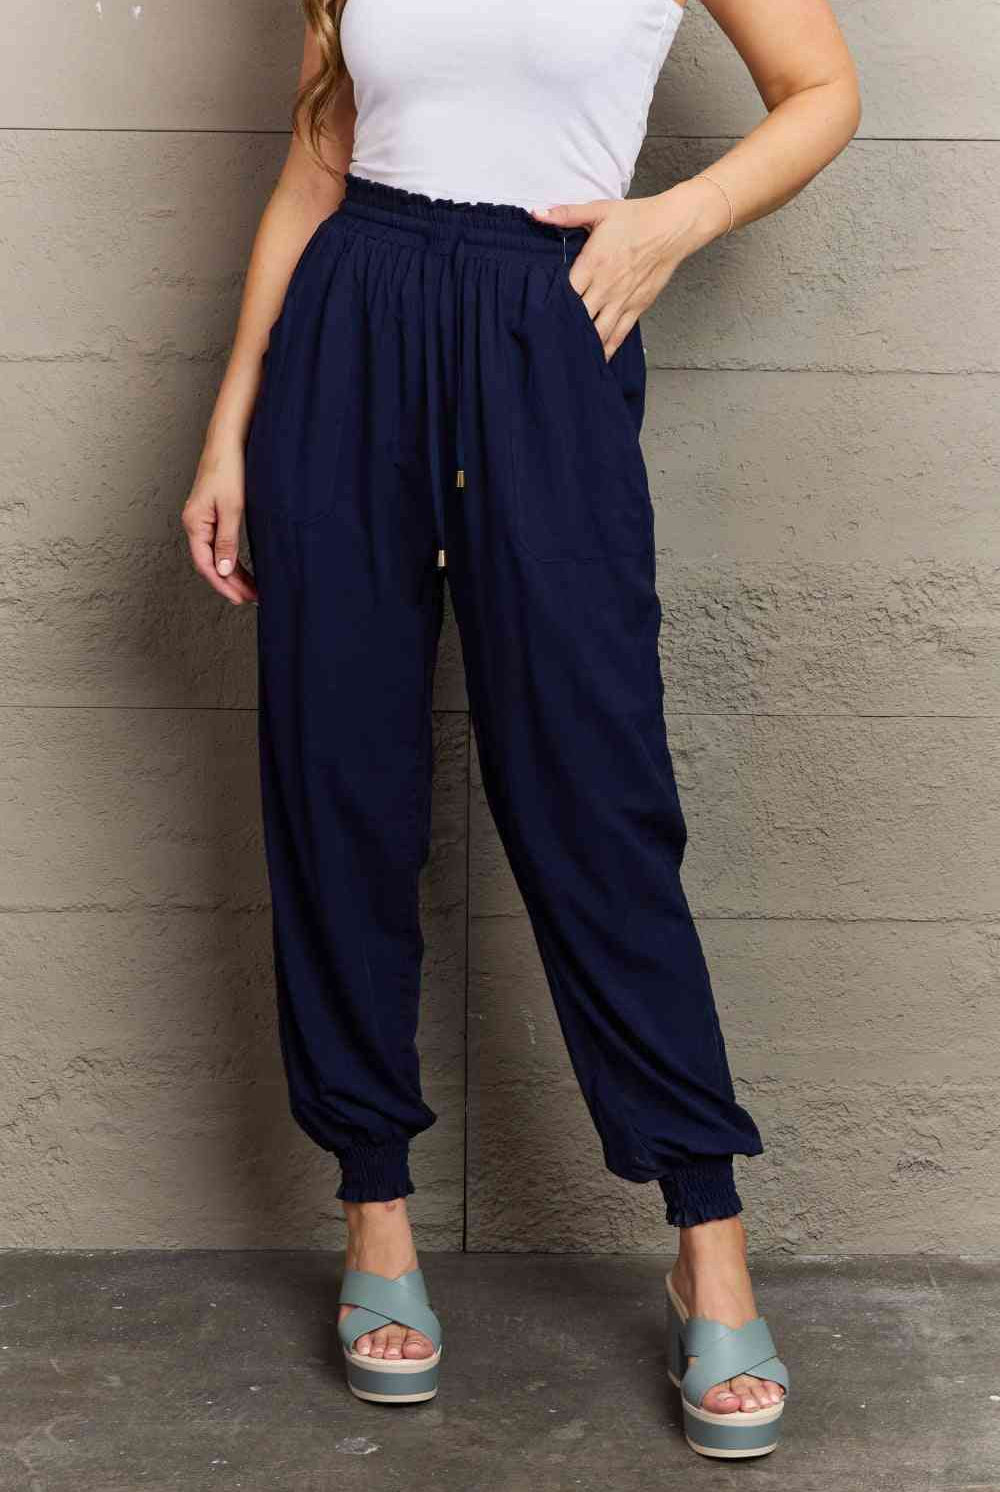 Tied Long Joggers with Pockets - GemThreads Boutique Tied Long Joggers with Pockets